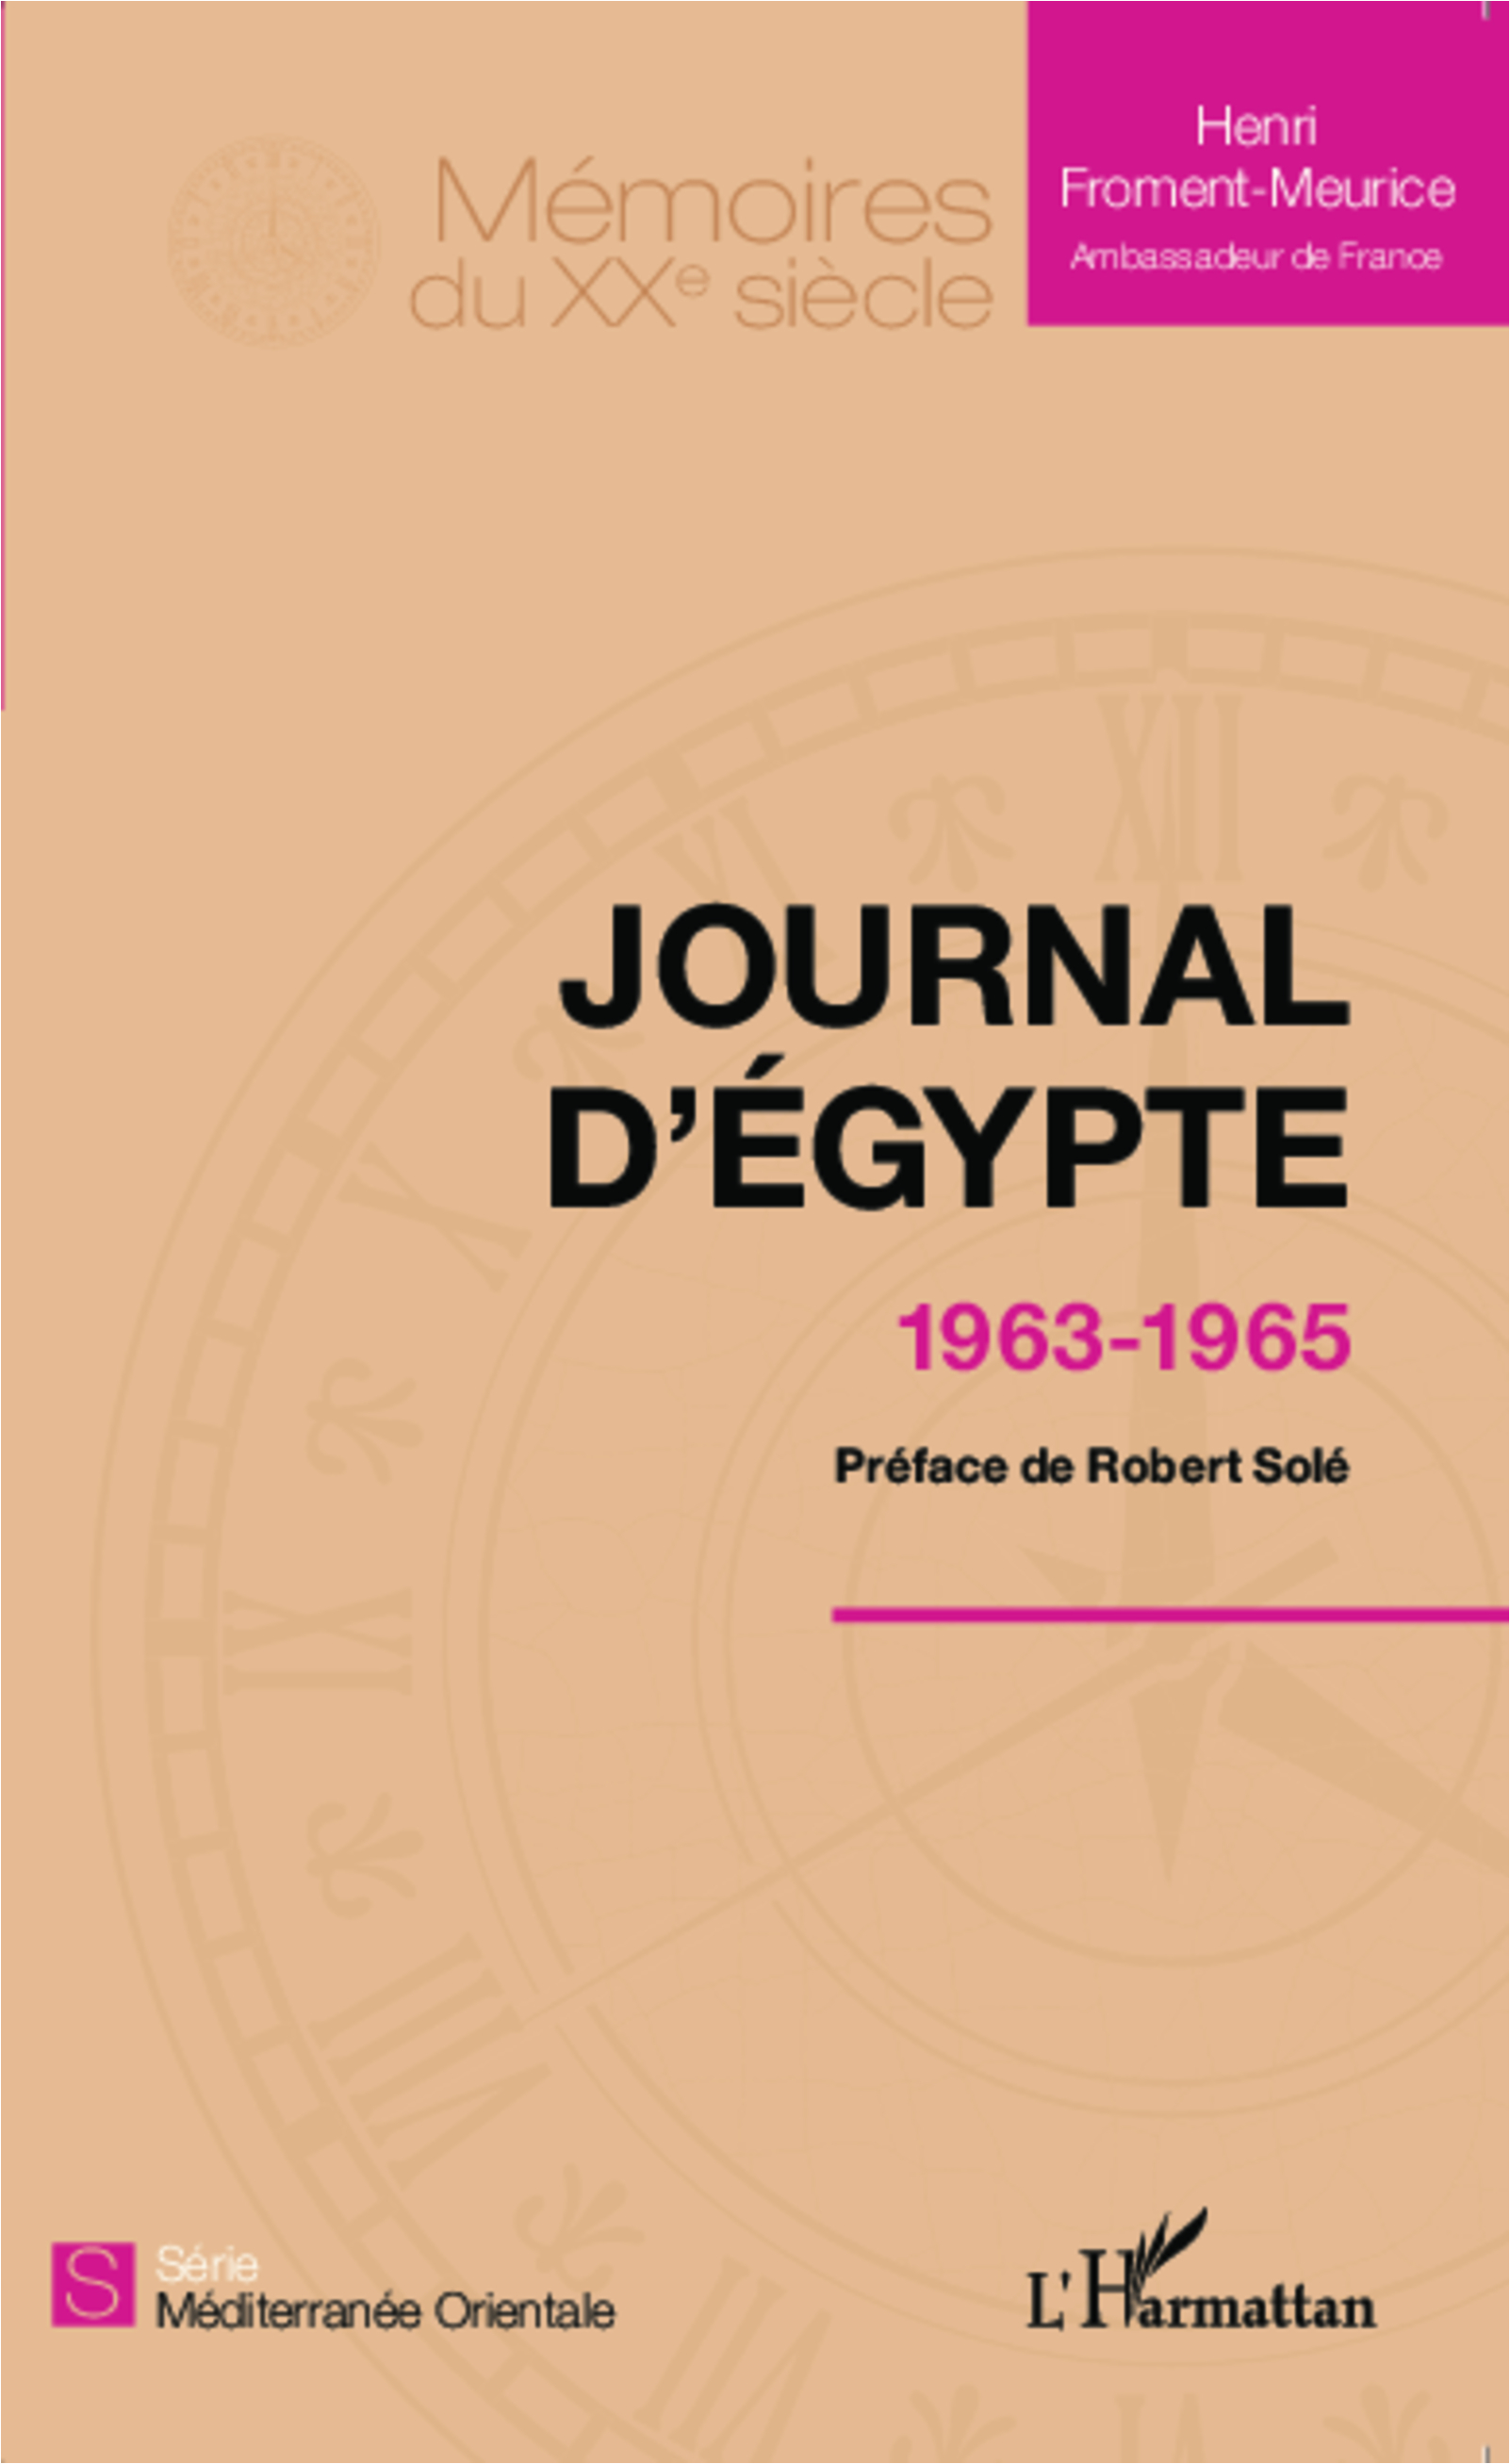 Journal d'Egypte, 1963-1965 (9782343038742-front-cover)